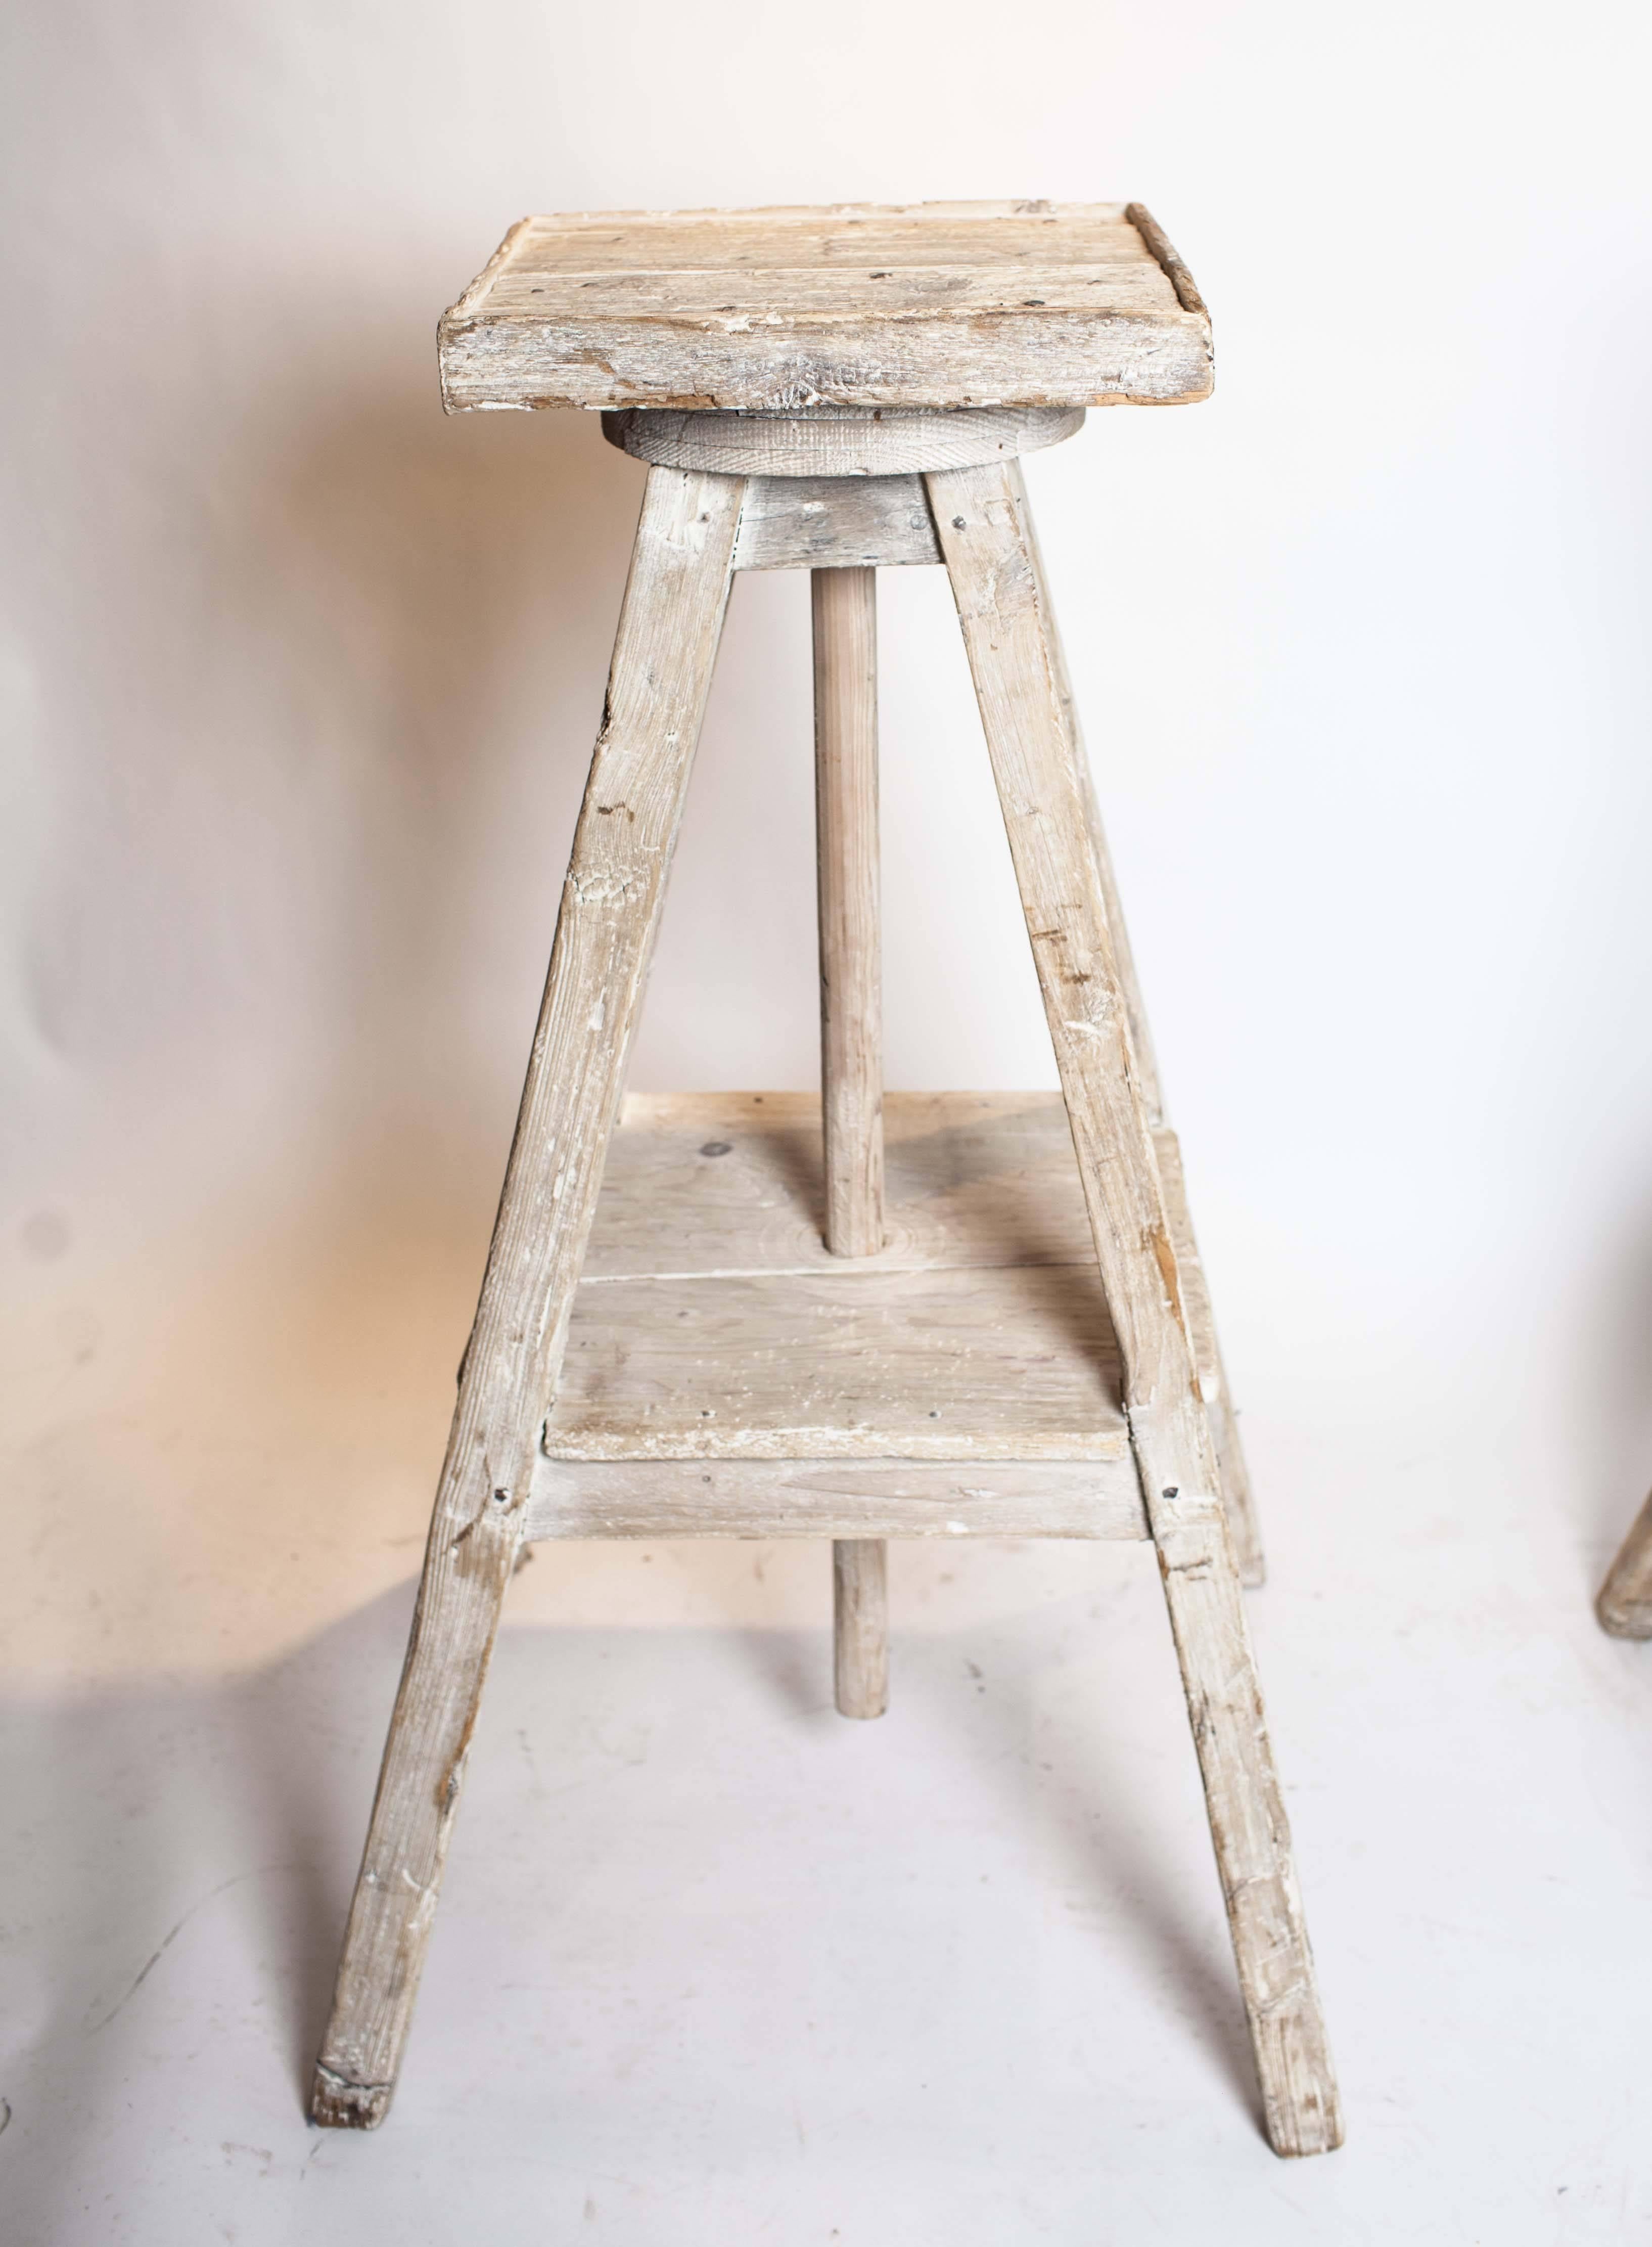 Bleached wood sculptor's pedestals have rotating square tops.